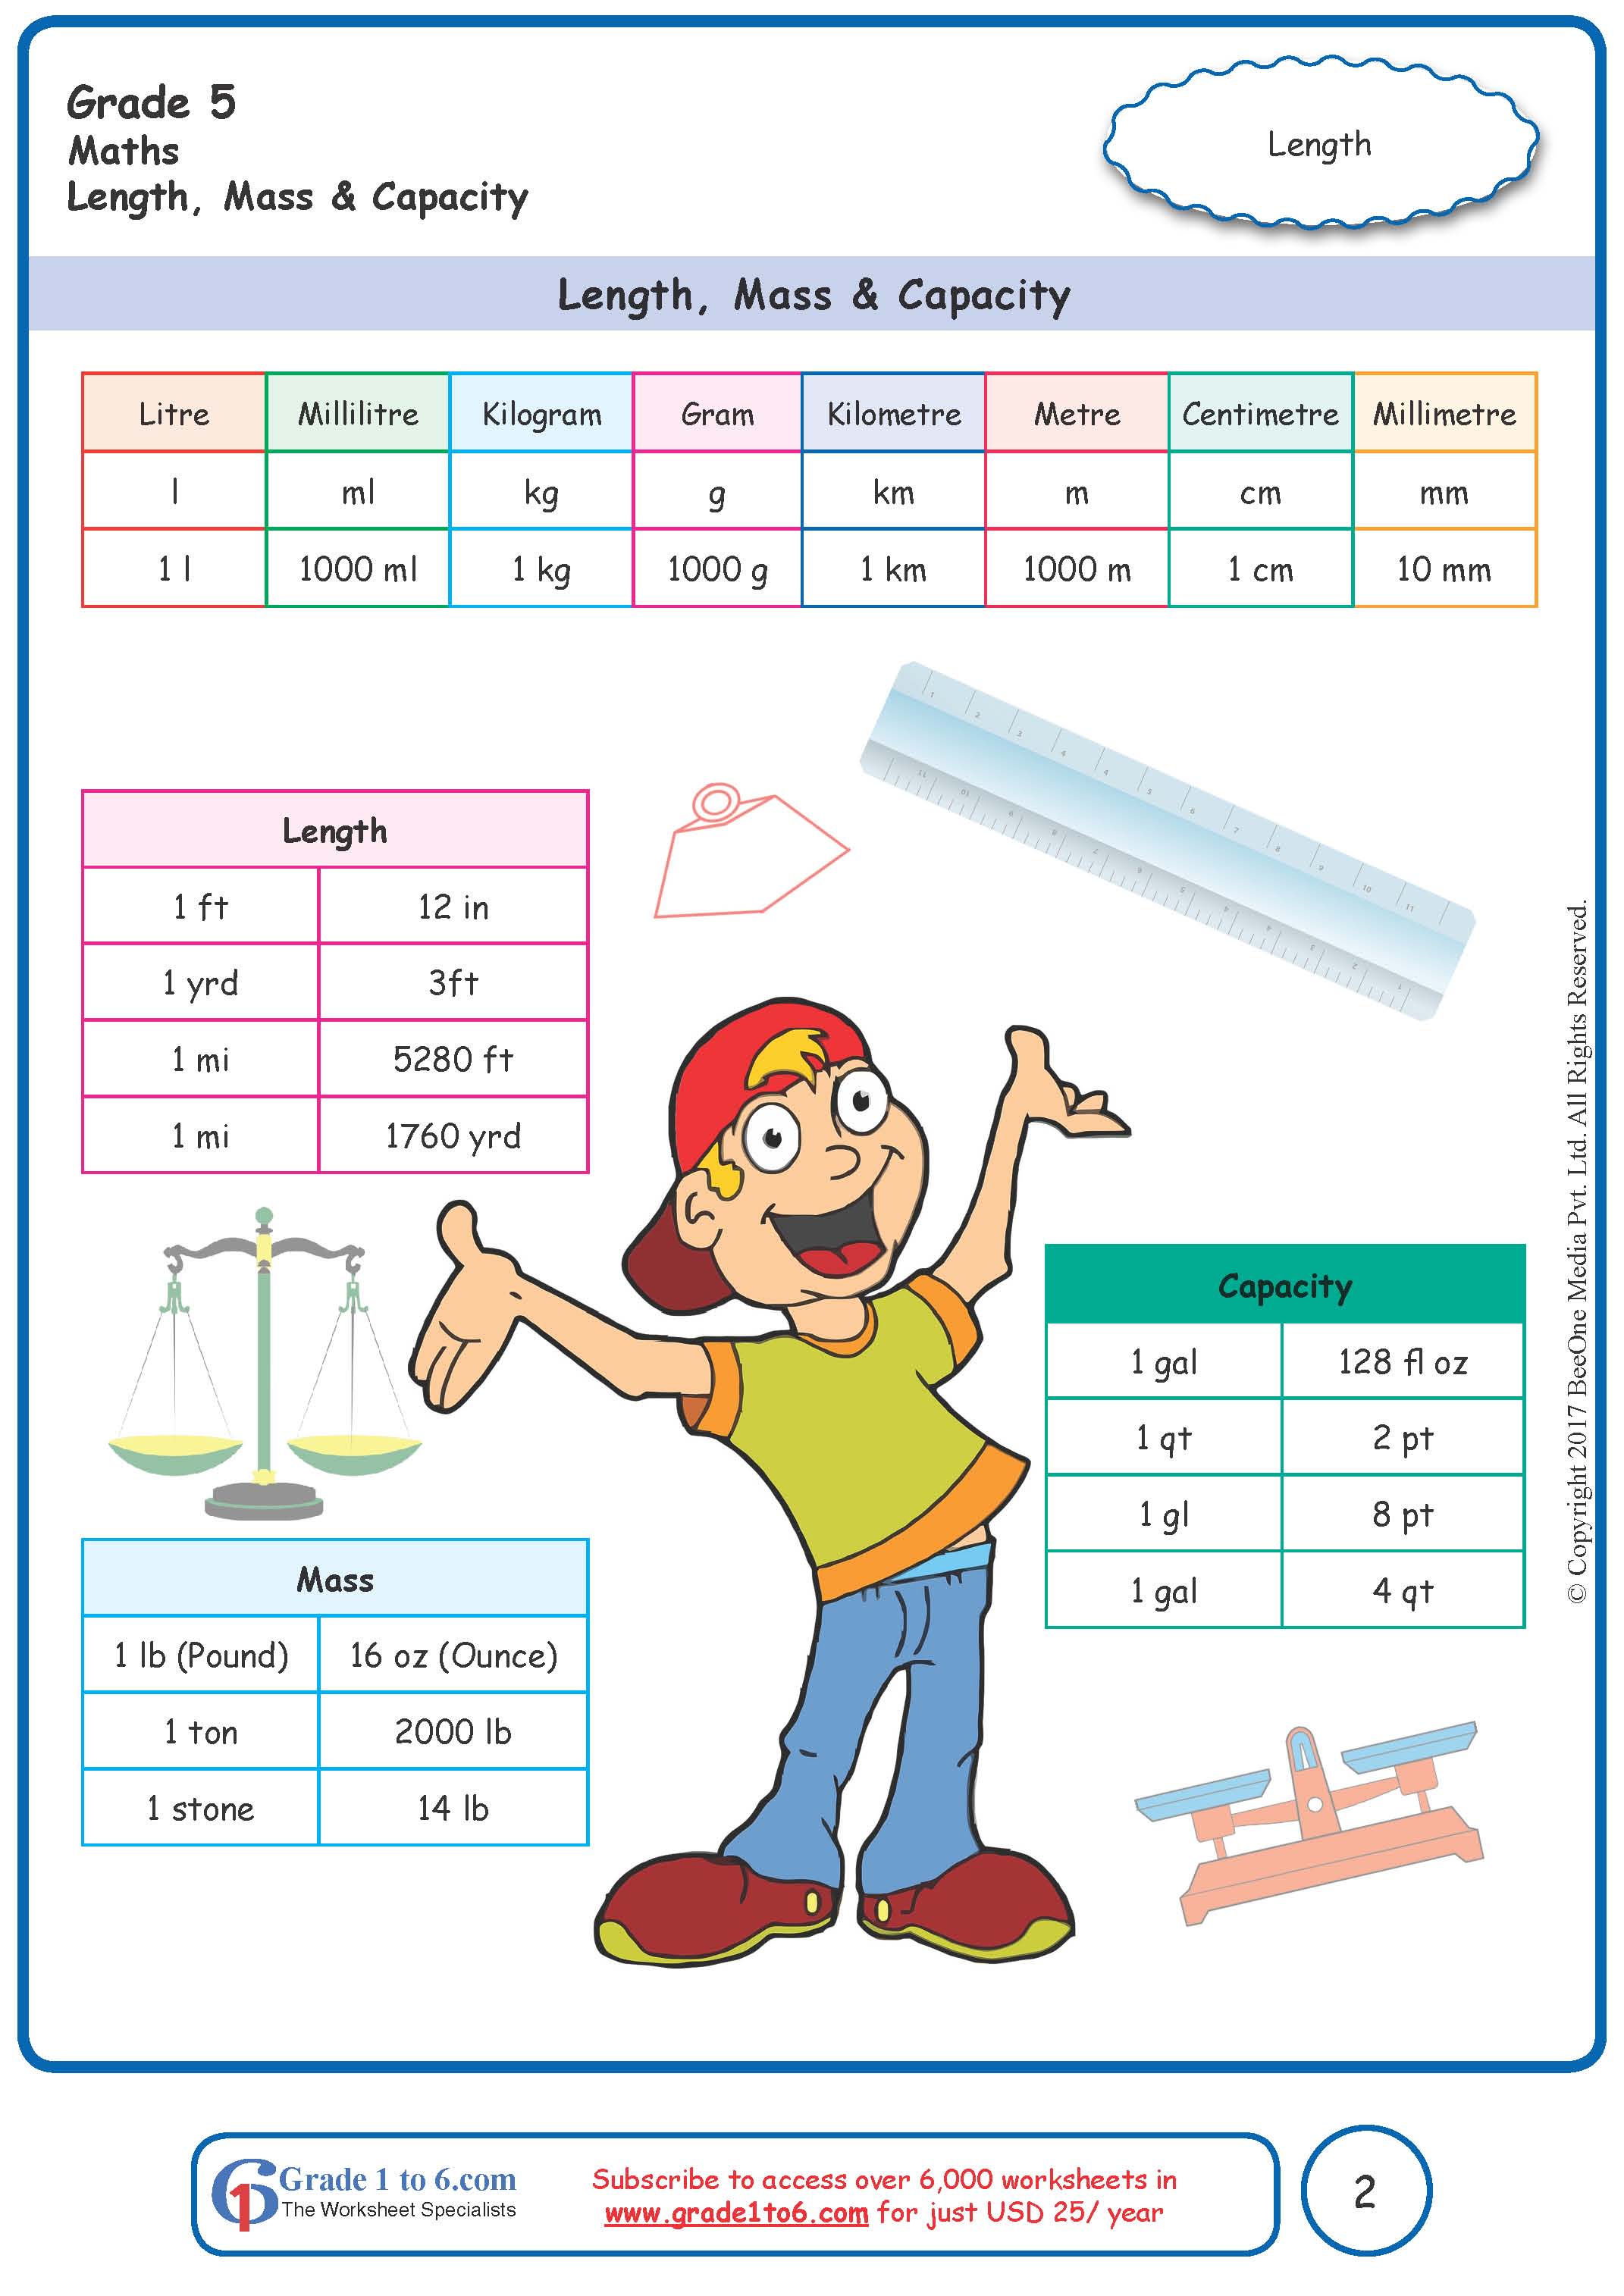 Length Conversion Chart For Kids